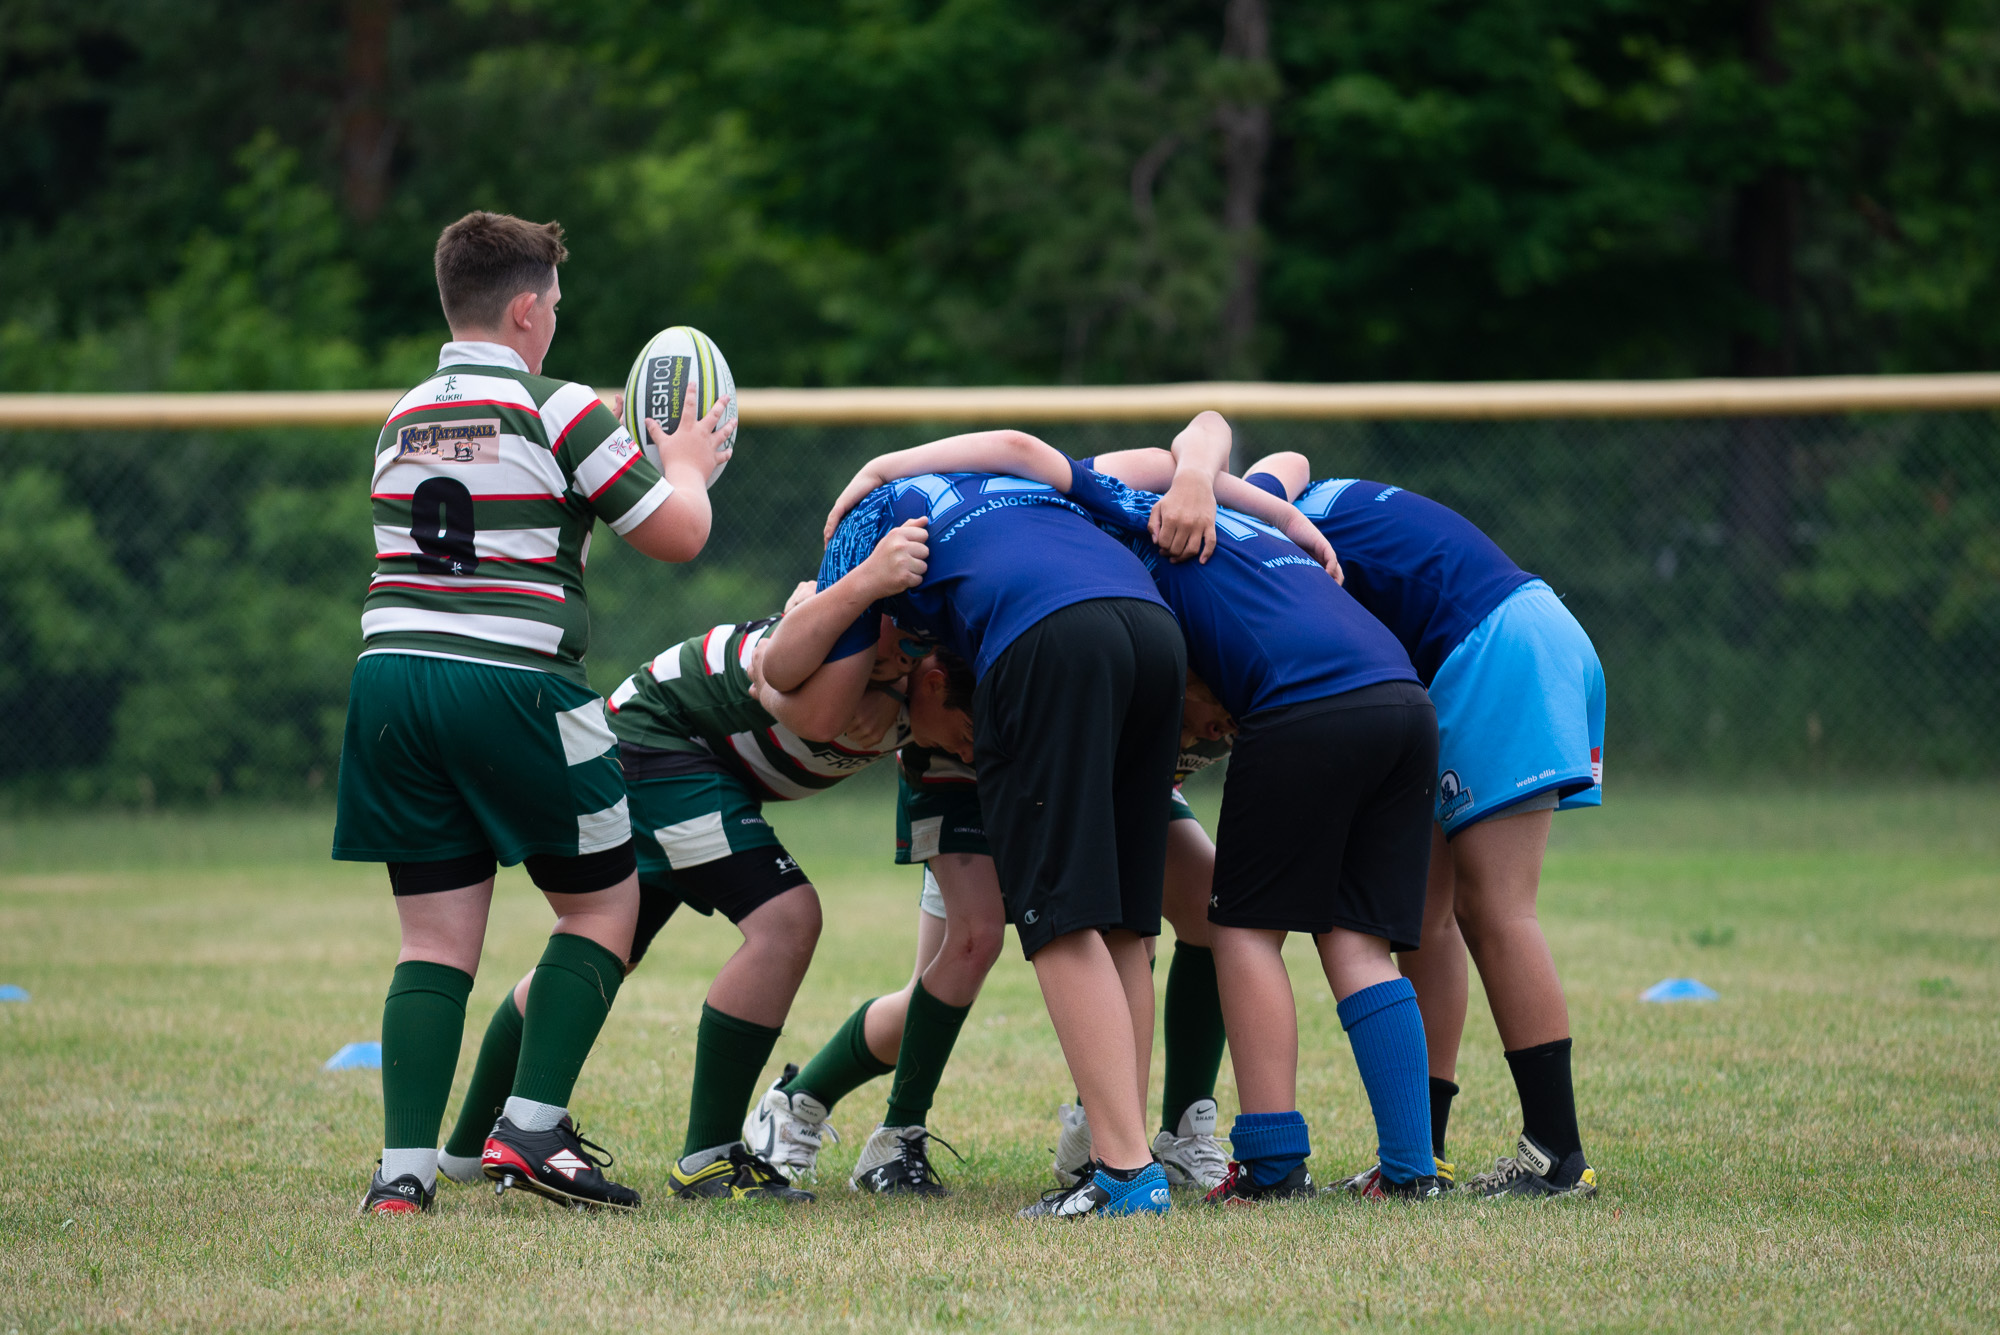 Young rugby players in a scrum